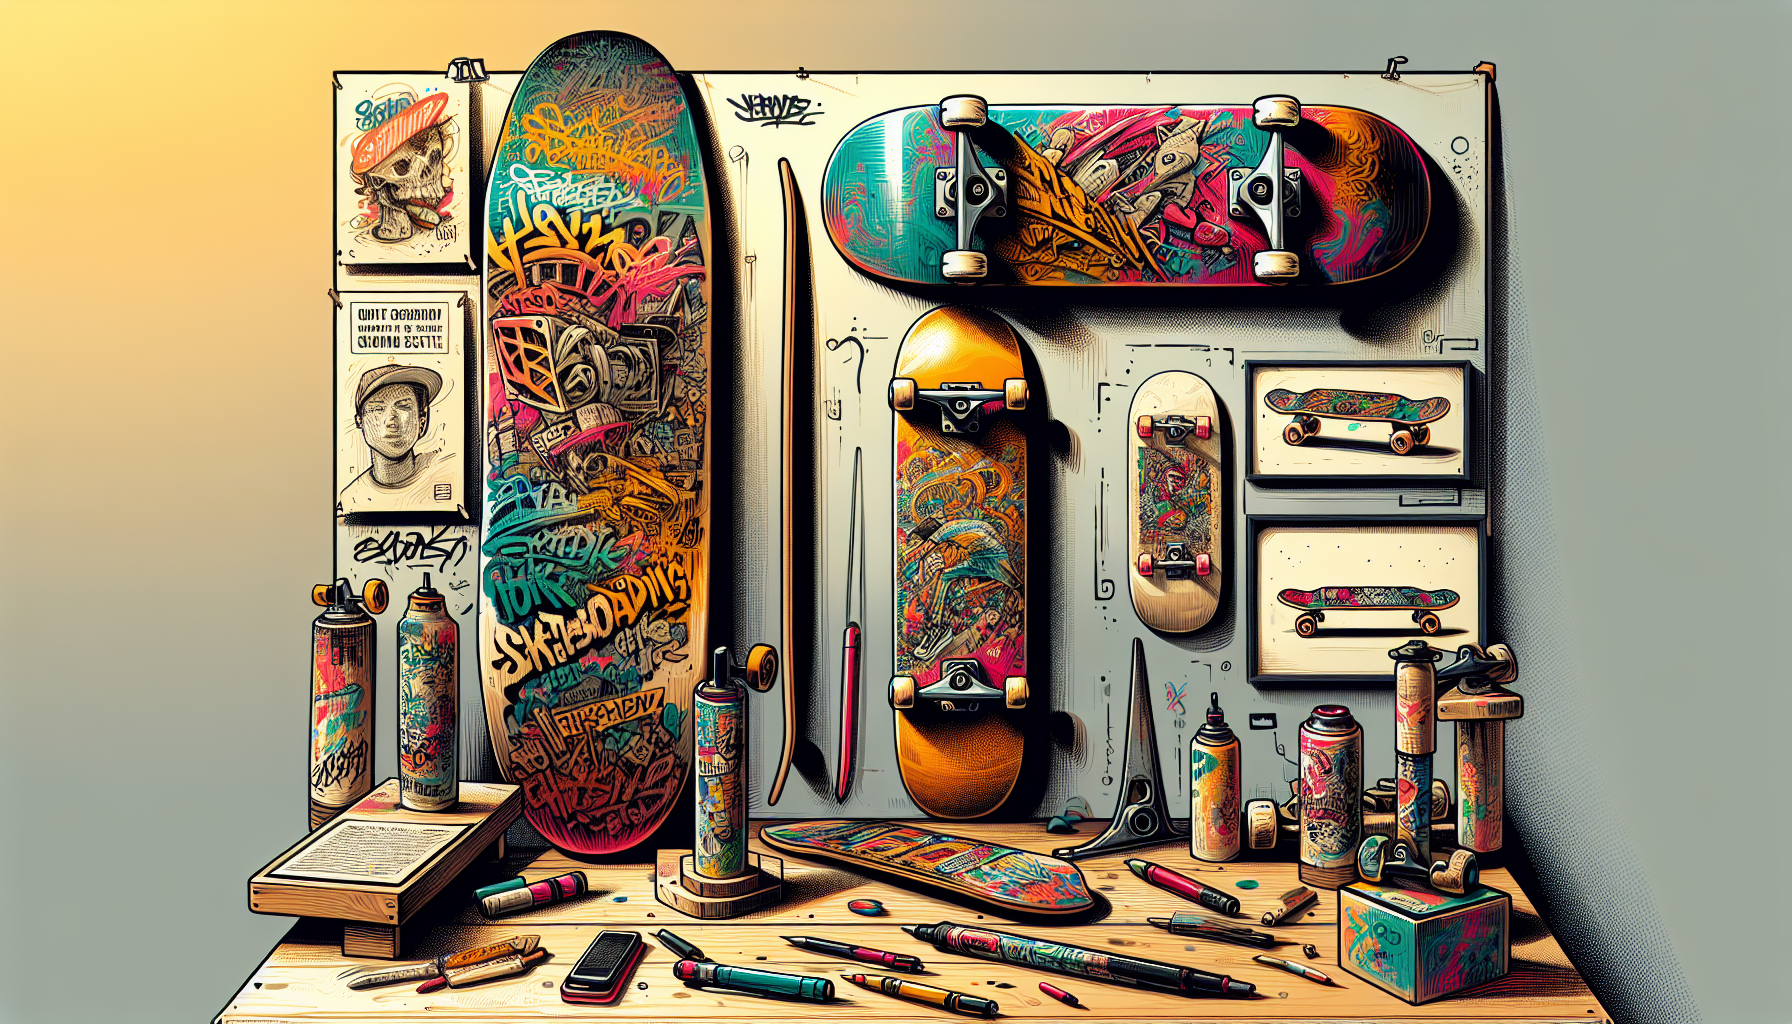 Can You Discuss The Significance Of Skateboarding Culture, Art, And Fashion?